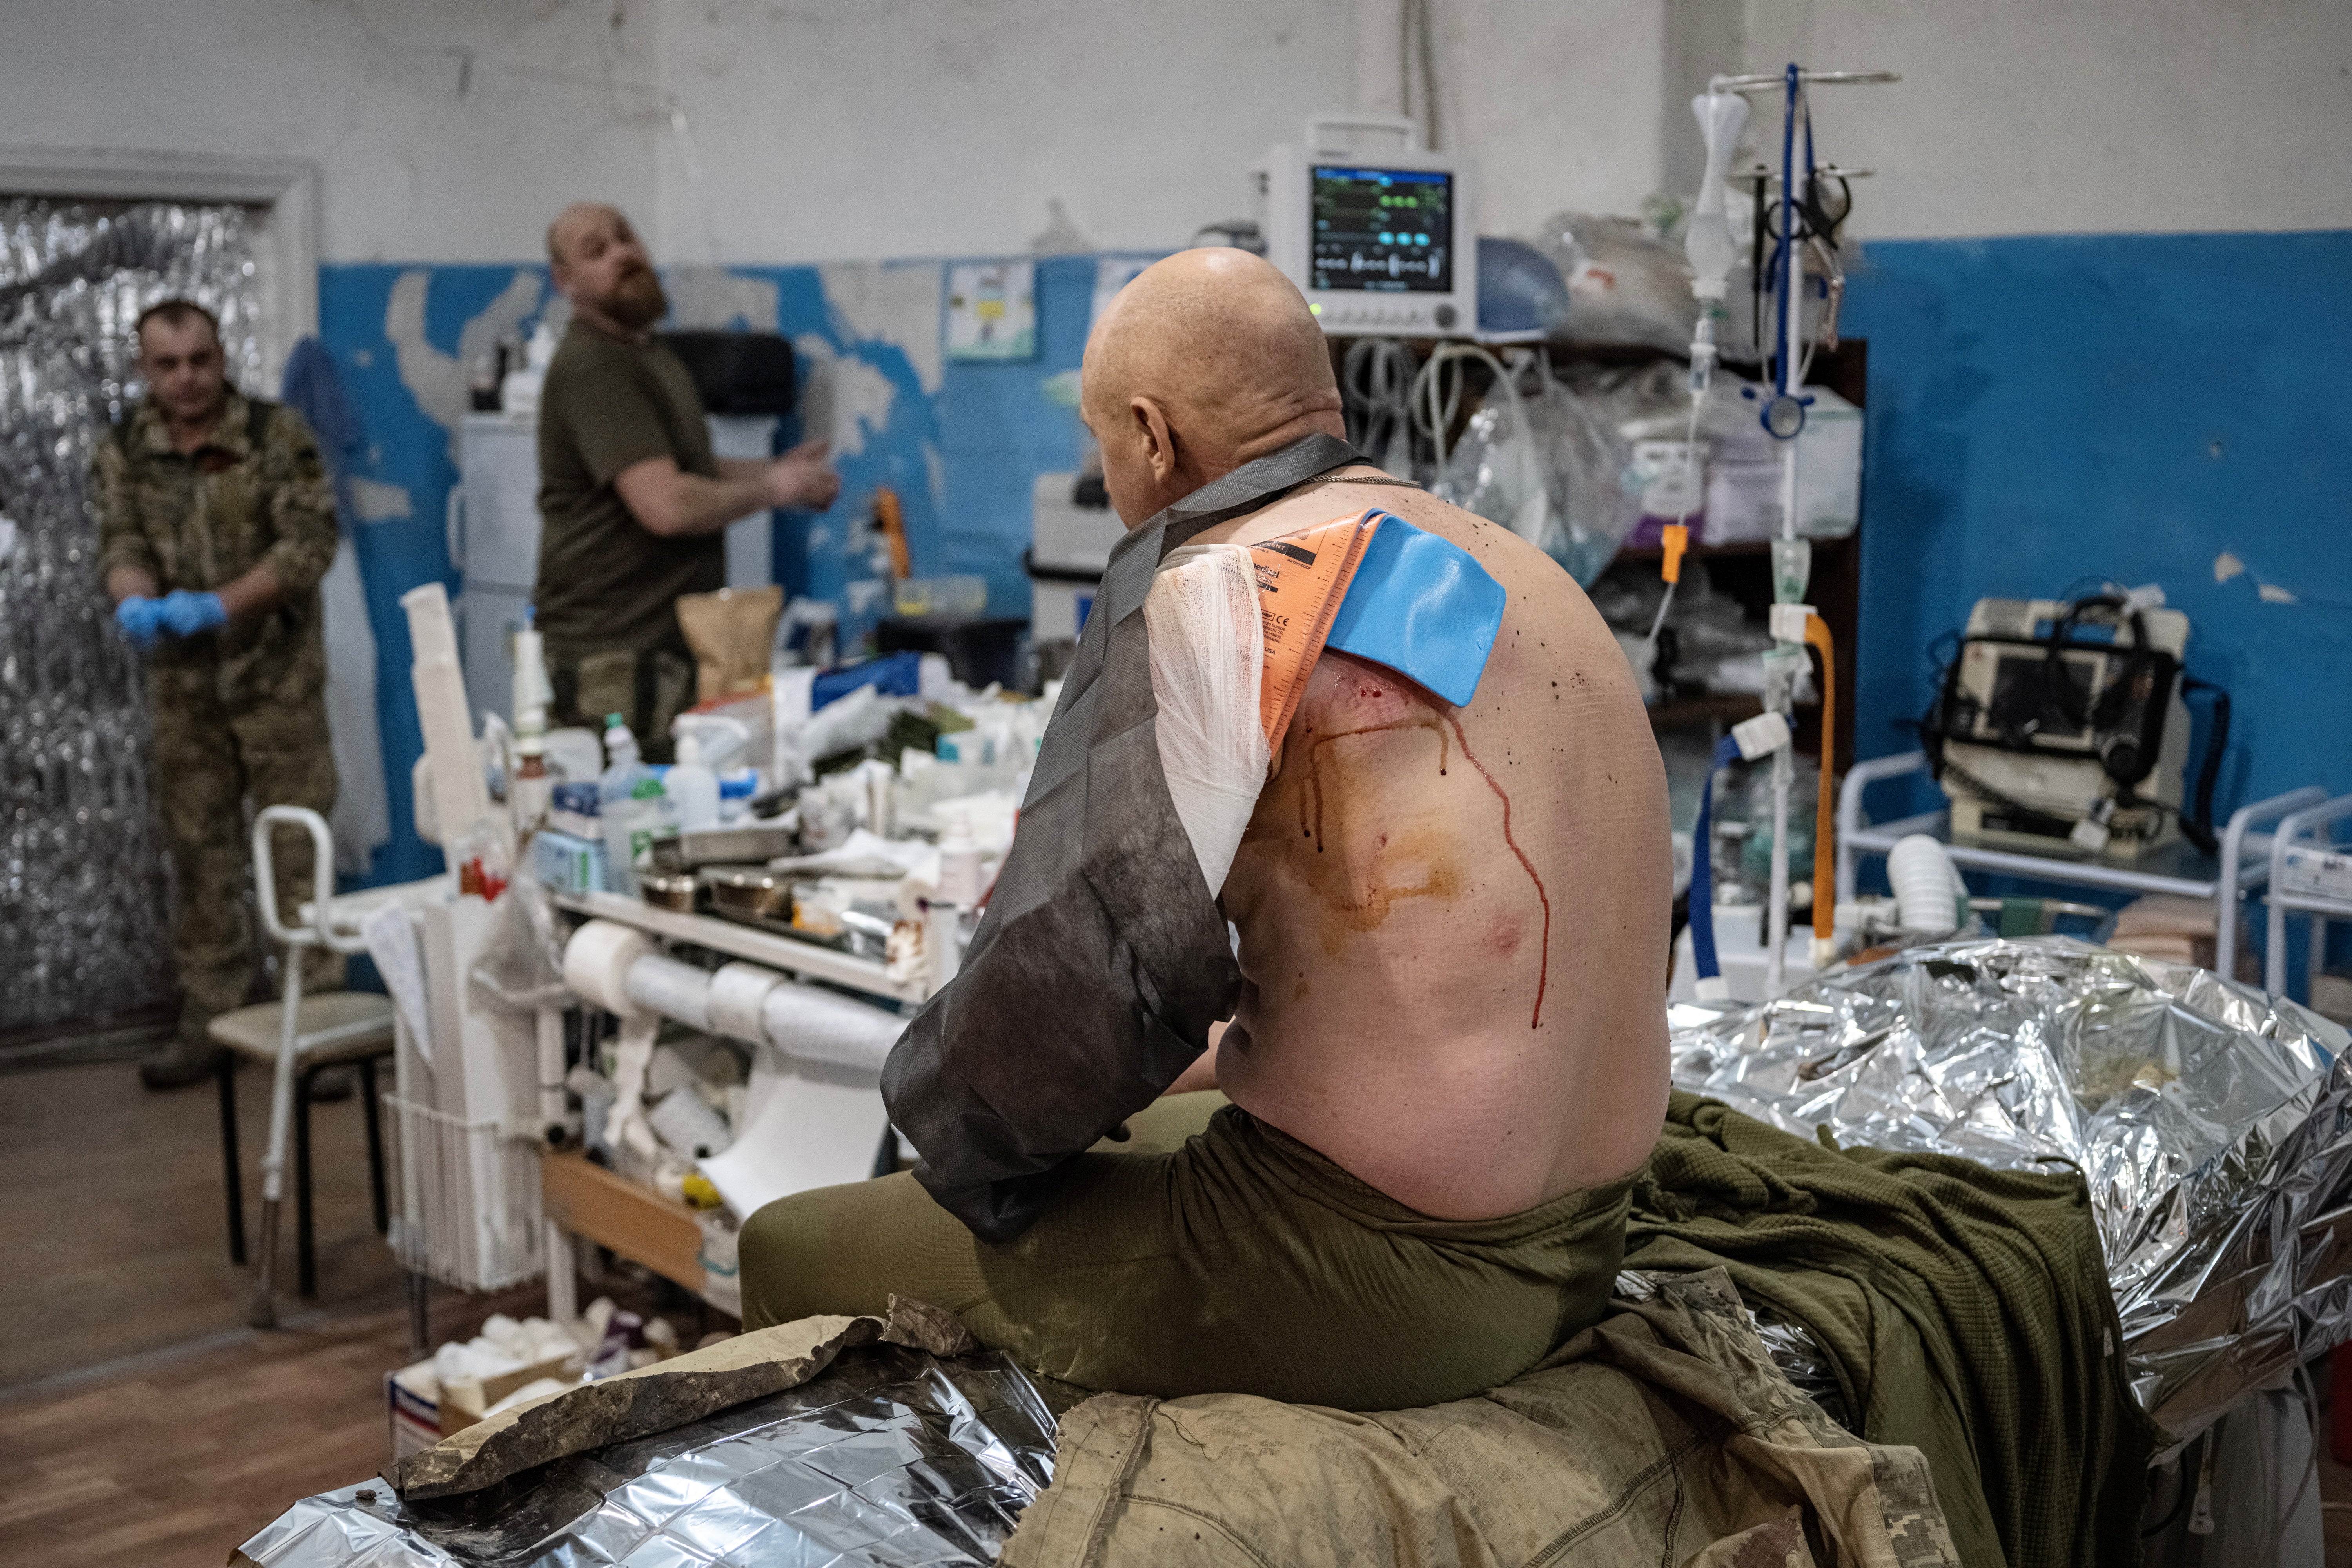 A wounded soldier sits on the operation table